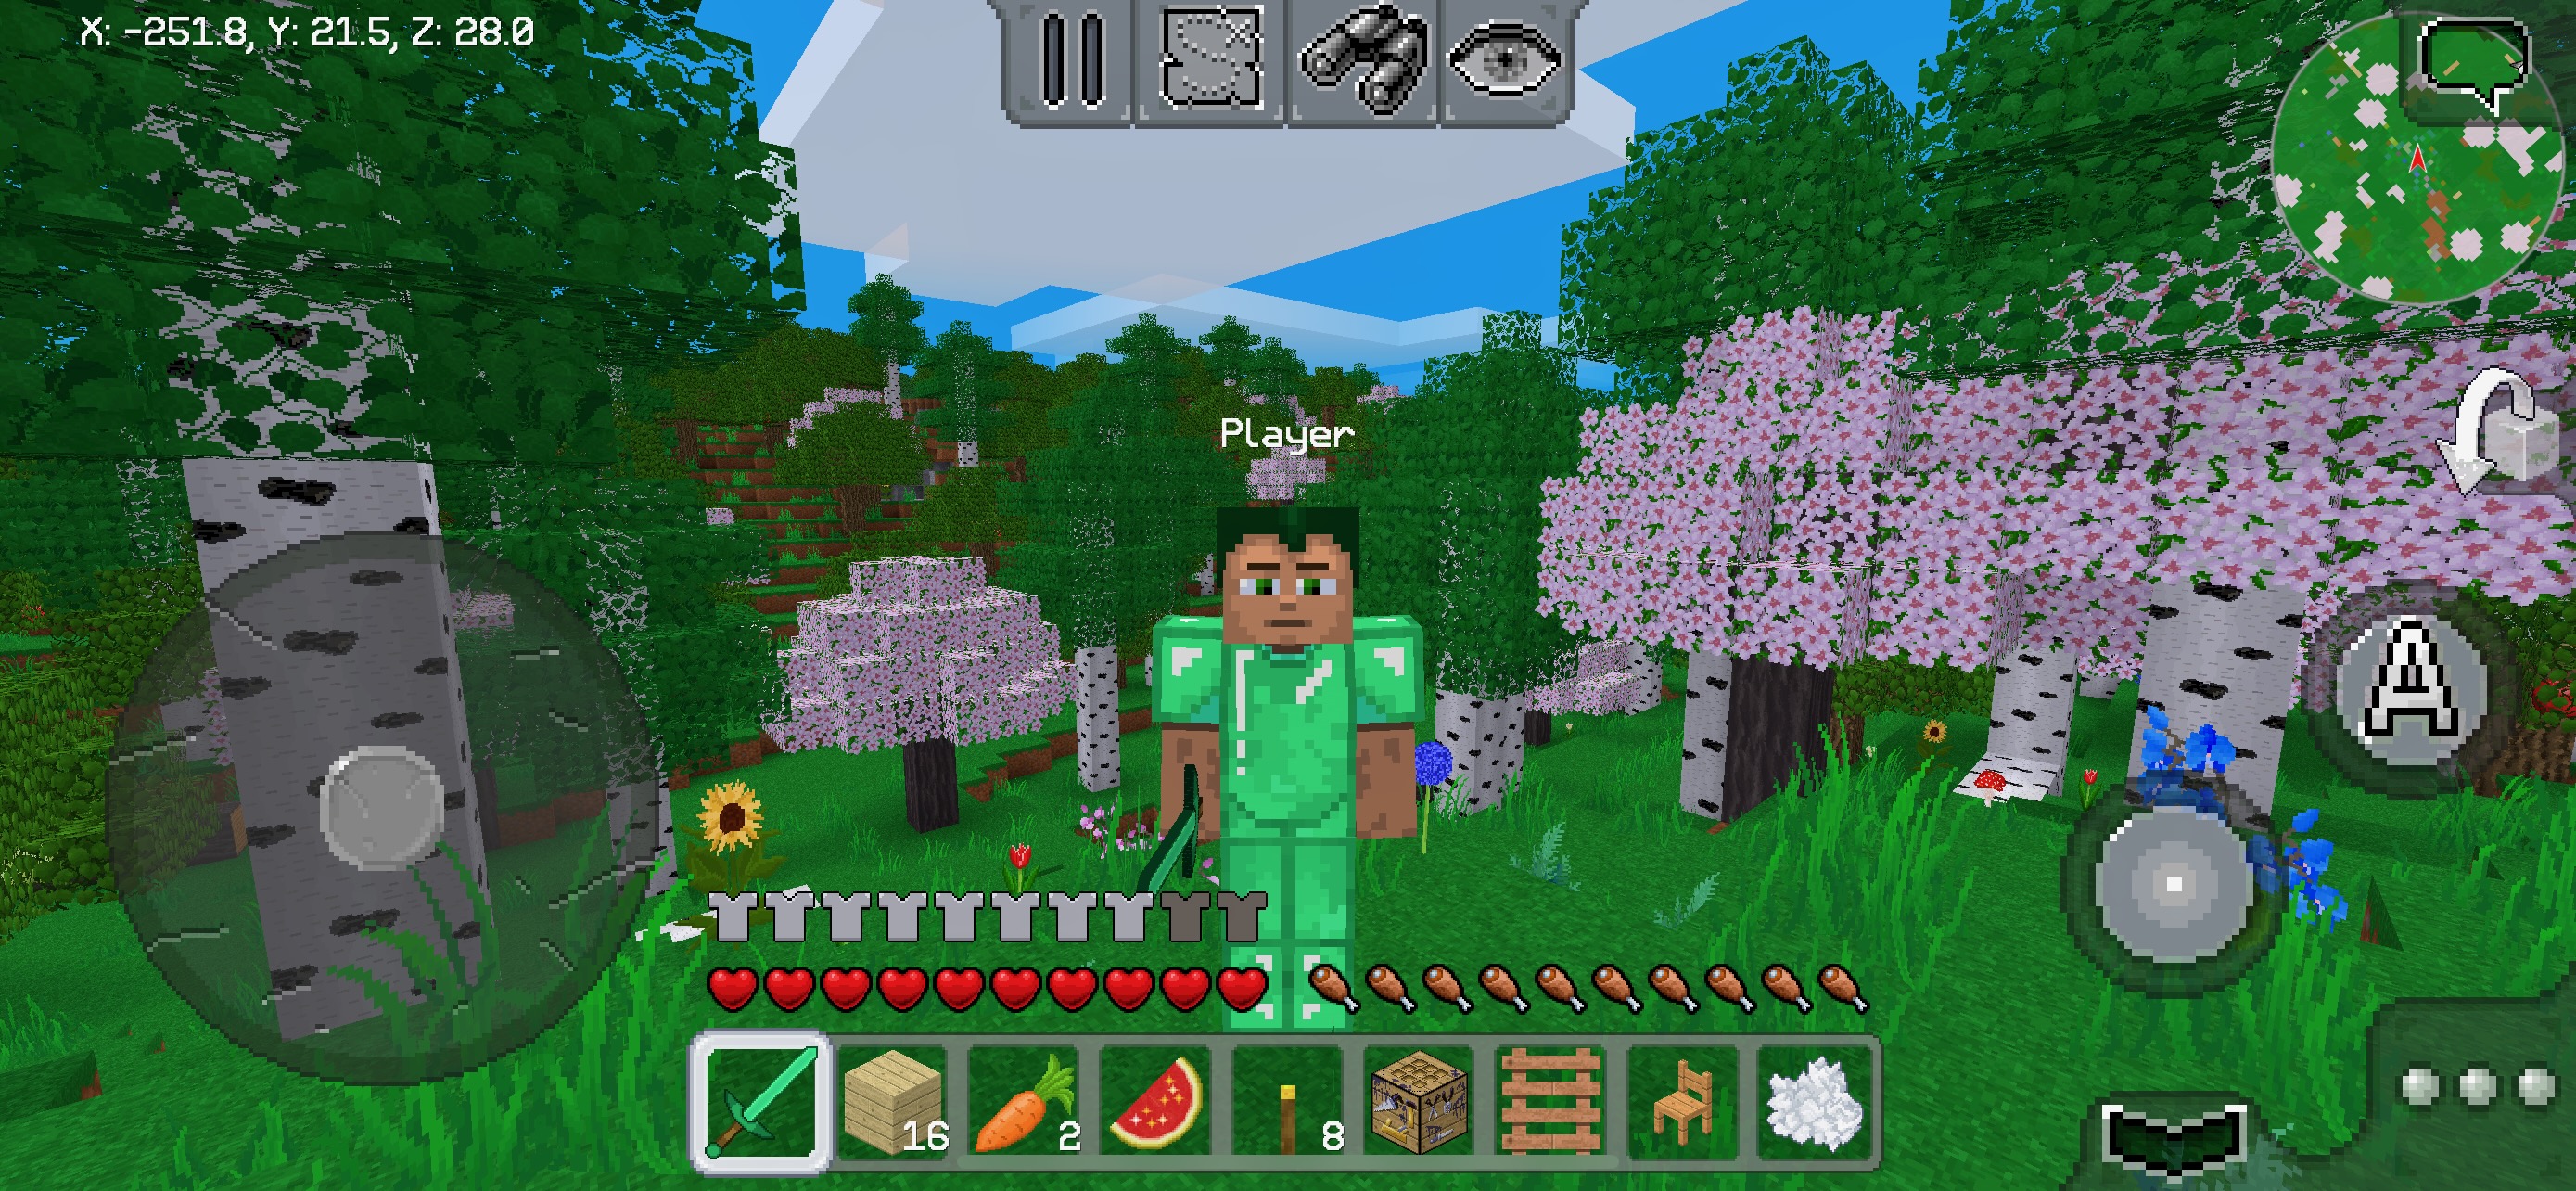 Download MultiCraft 2 - Free Miner and Crafting android on PC